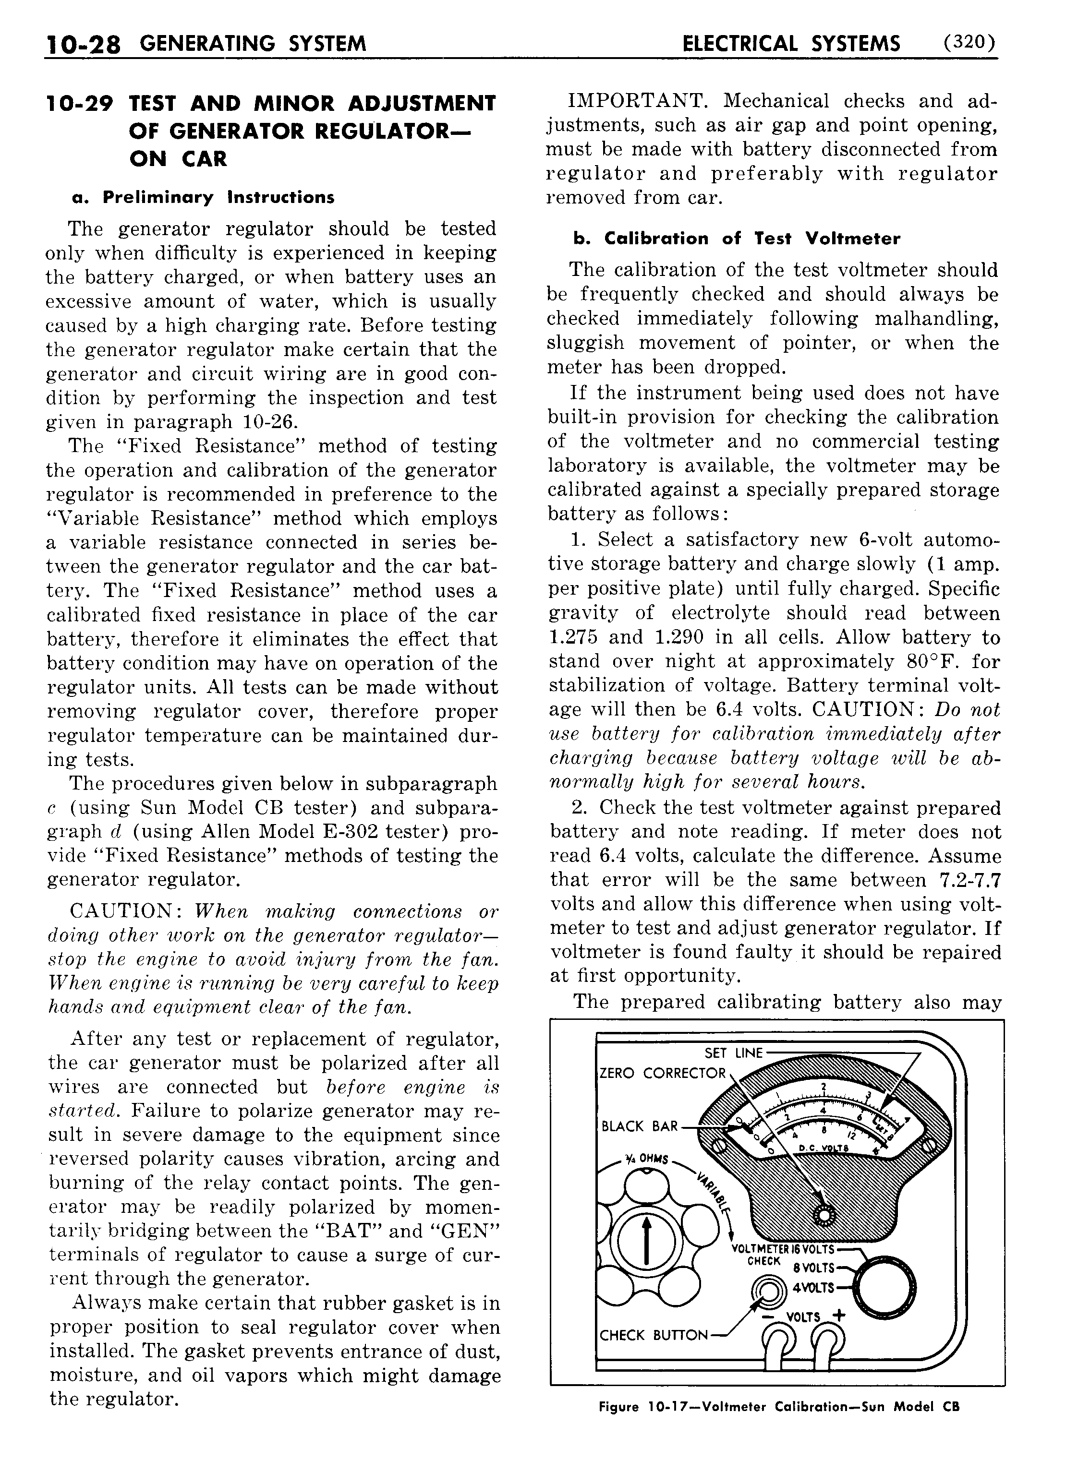 n_11 1951 Buick Shop Manual - Electrical Systems-028-028.jpg